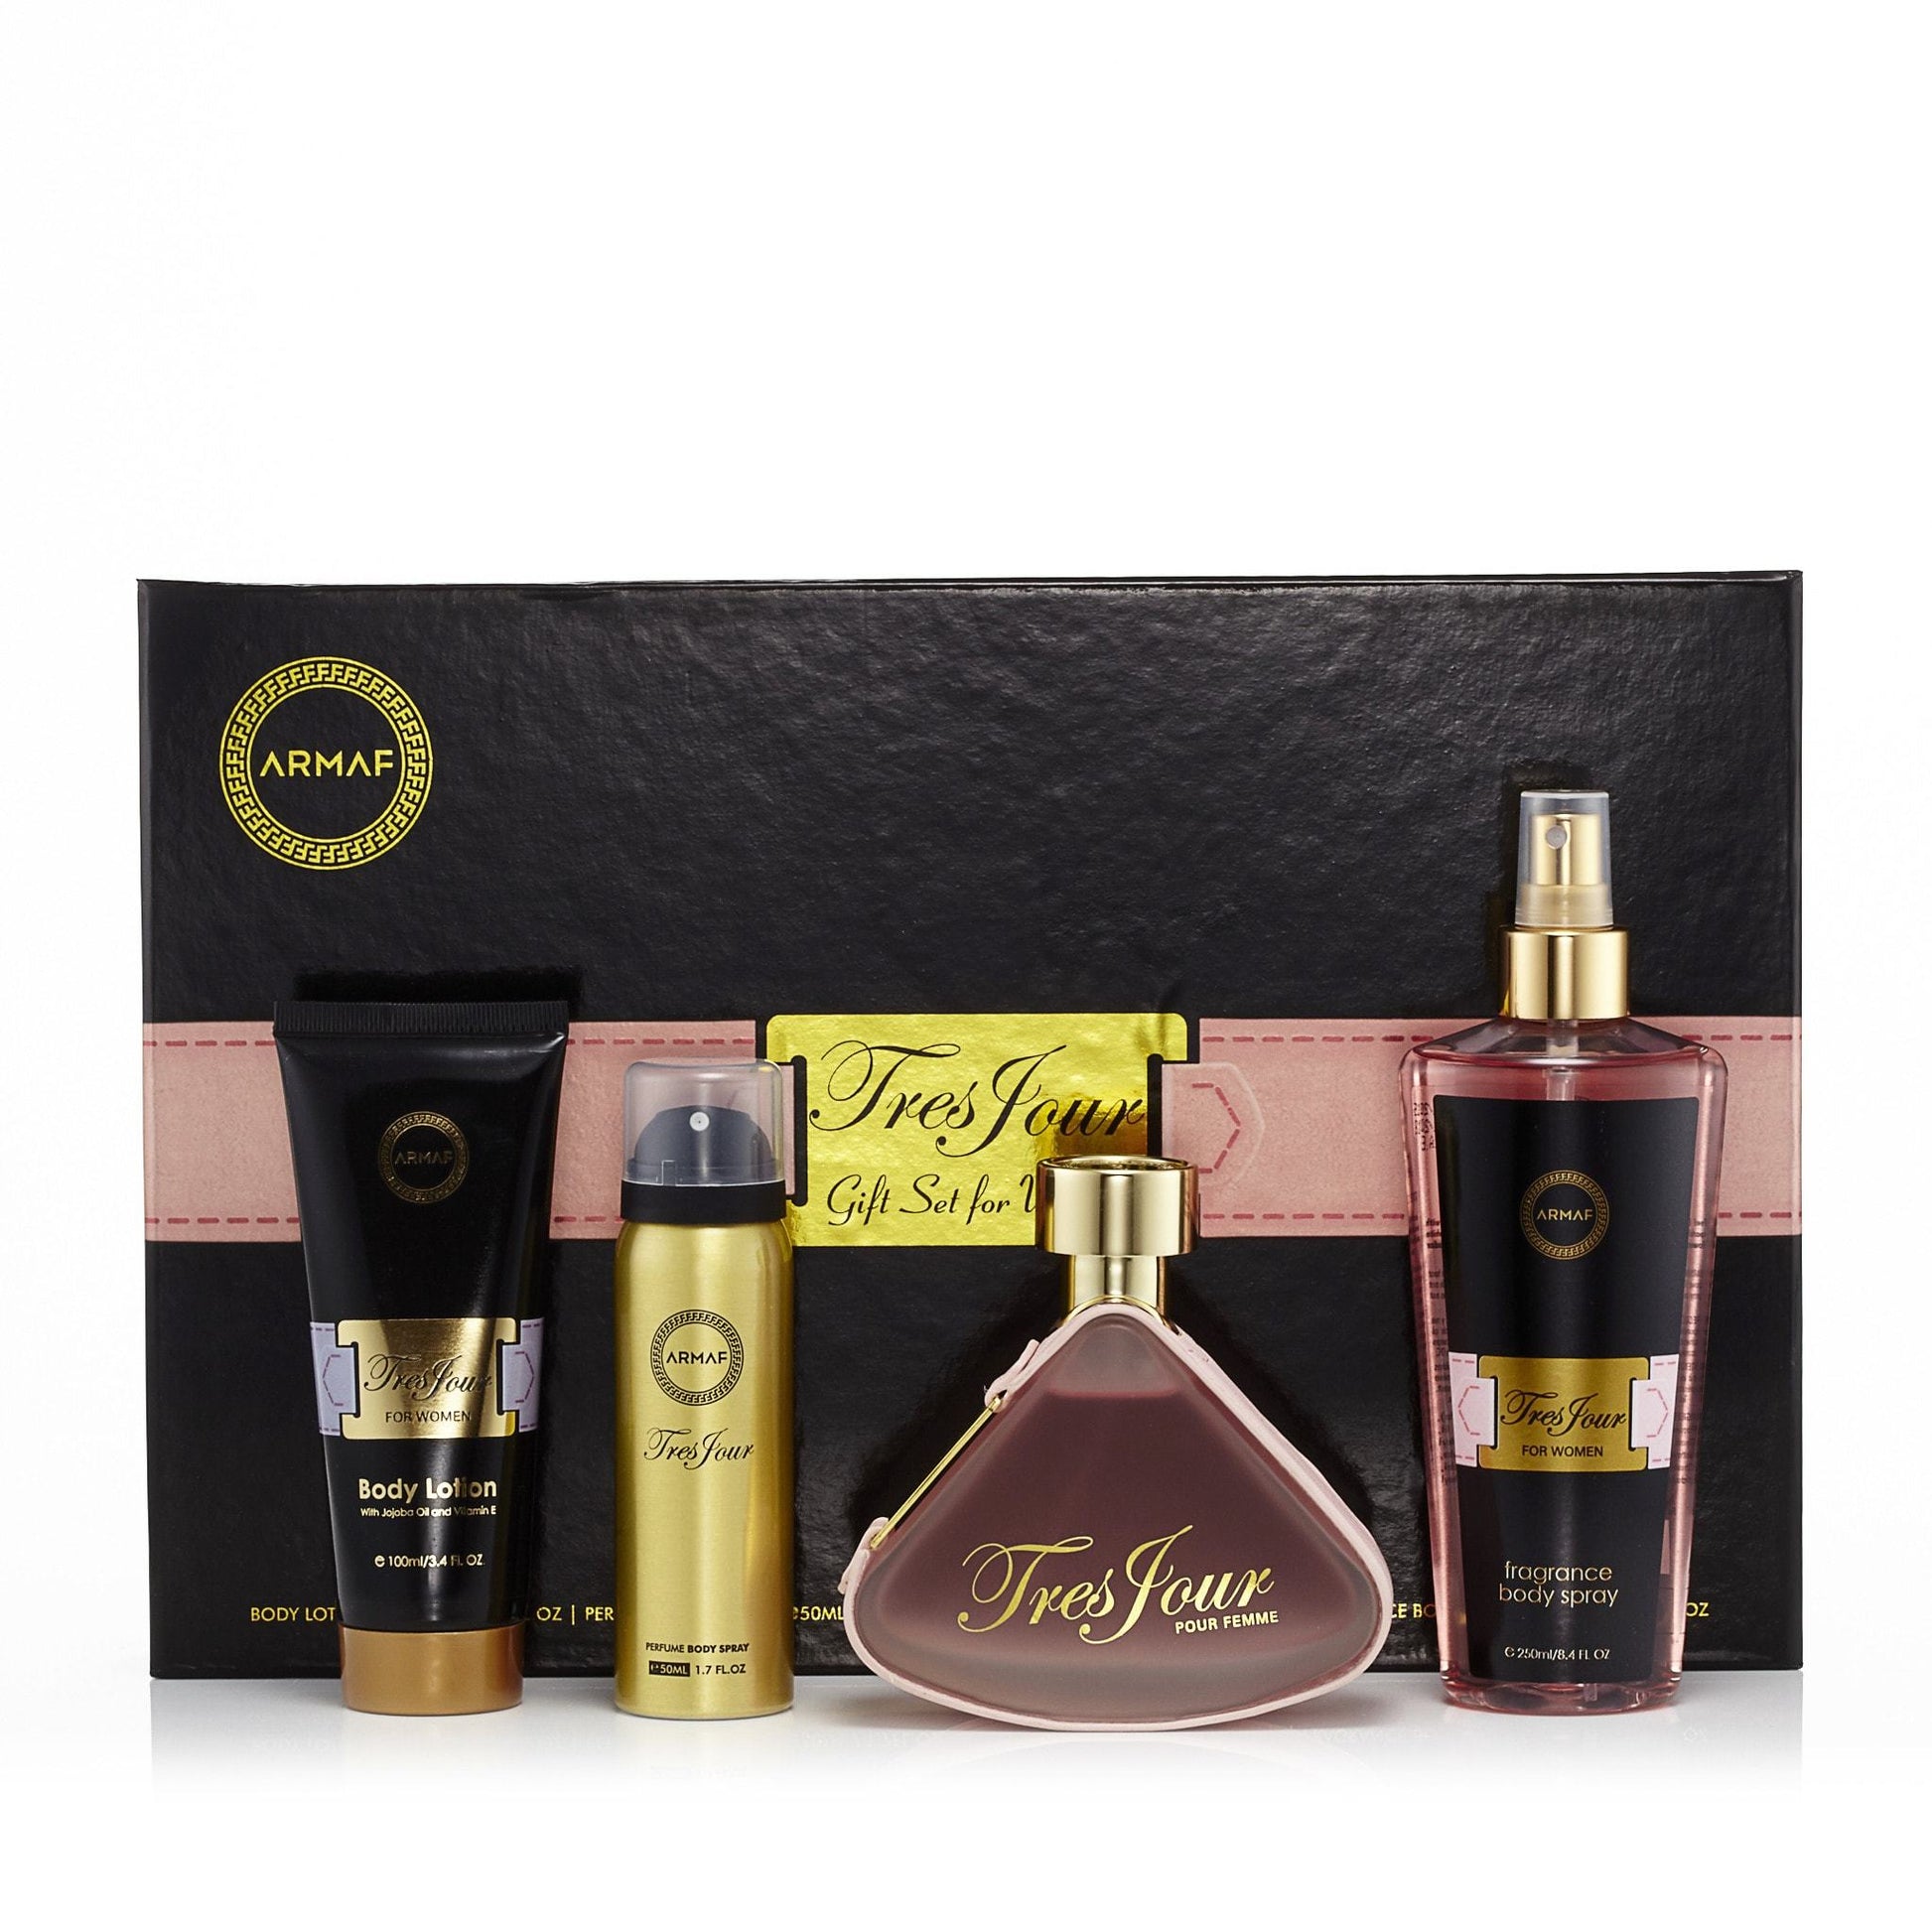 Tres Jour Gift Set for Women, Product image 2